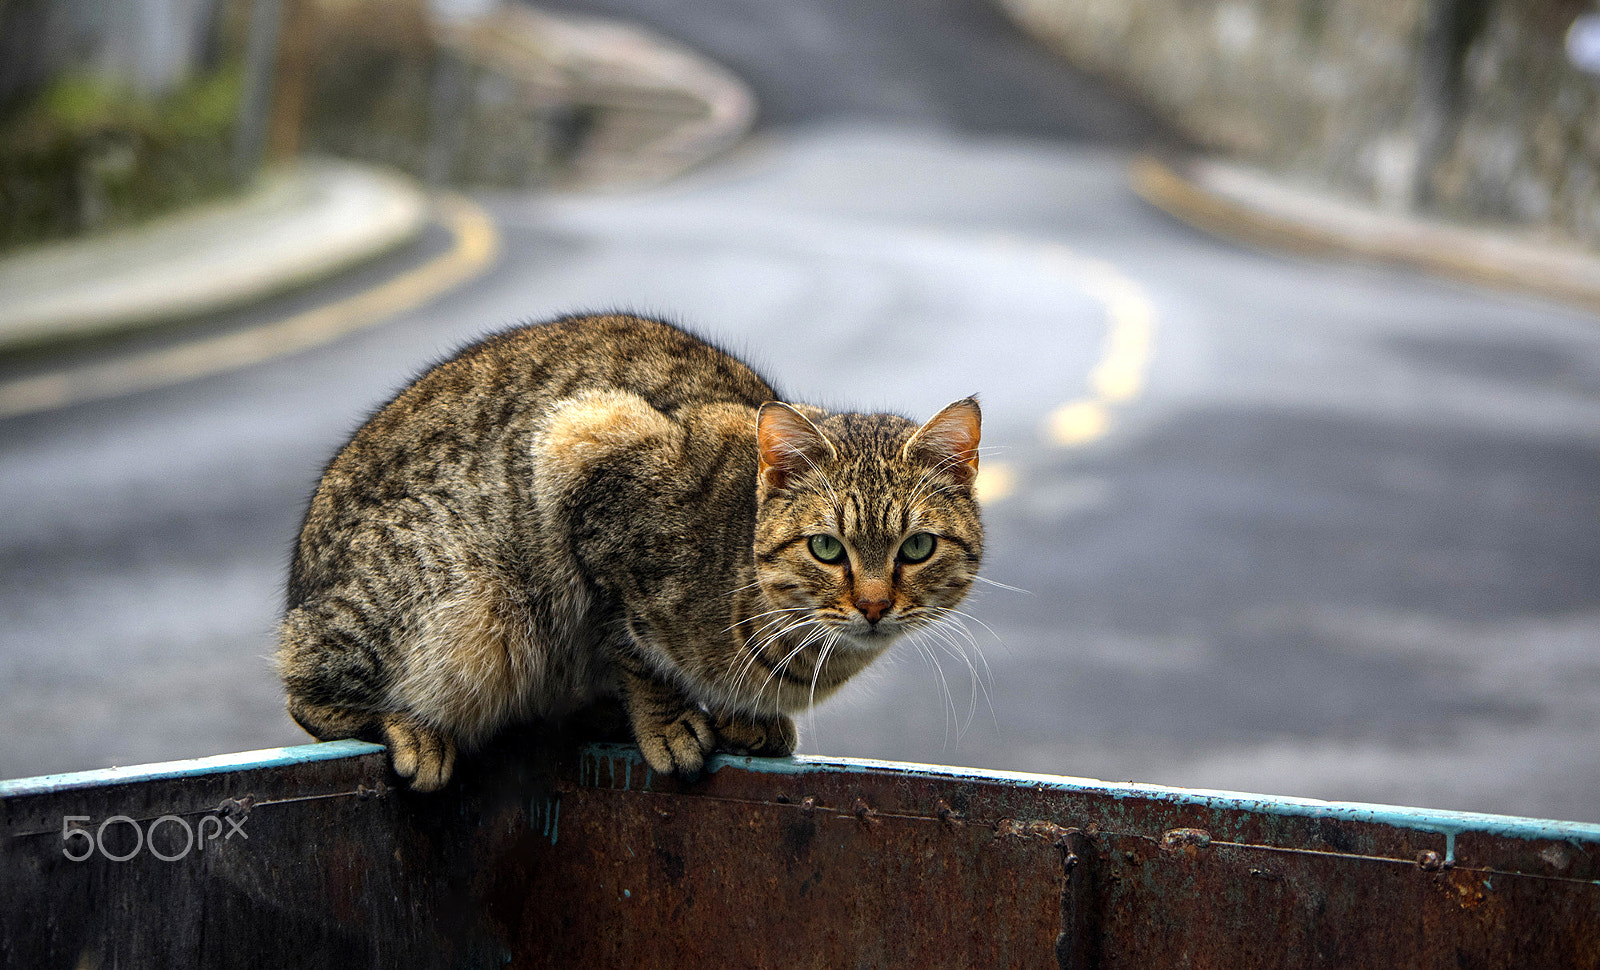 Pentax K-3 II sample photo. Cat of the streets photography